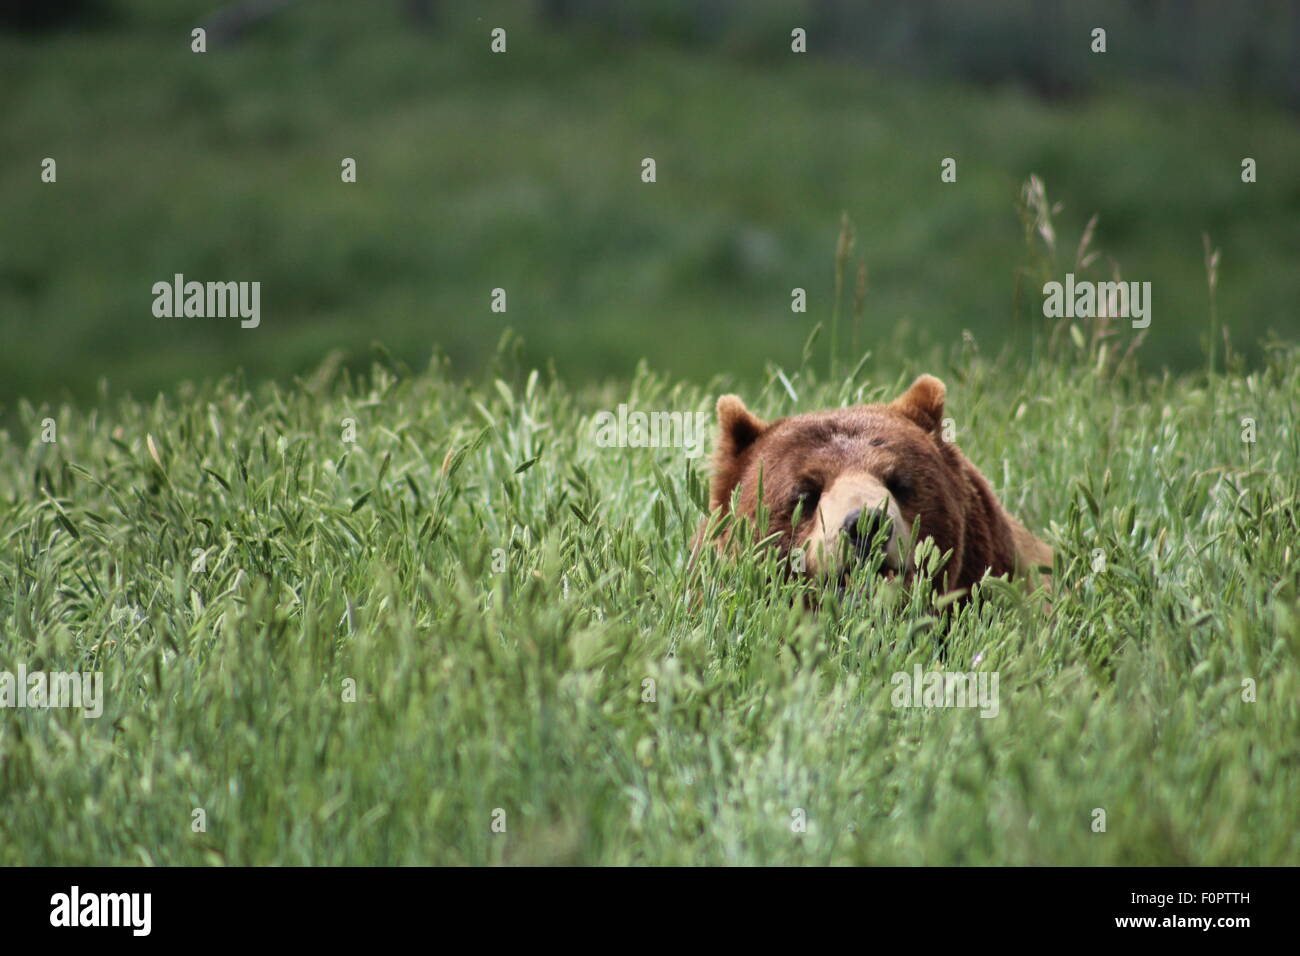 Looming Grizzly Bear Stock Photo